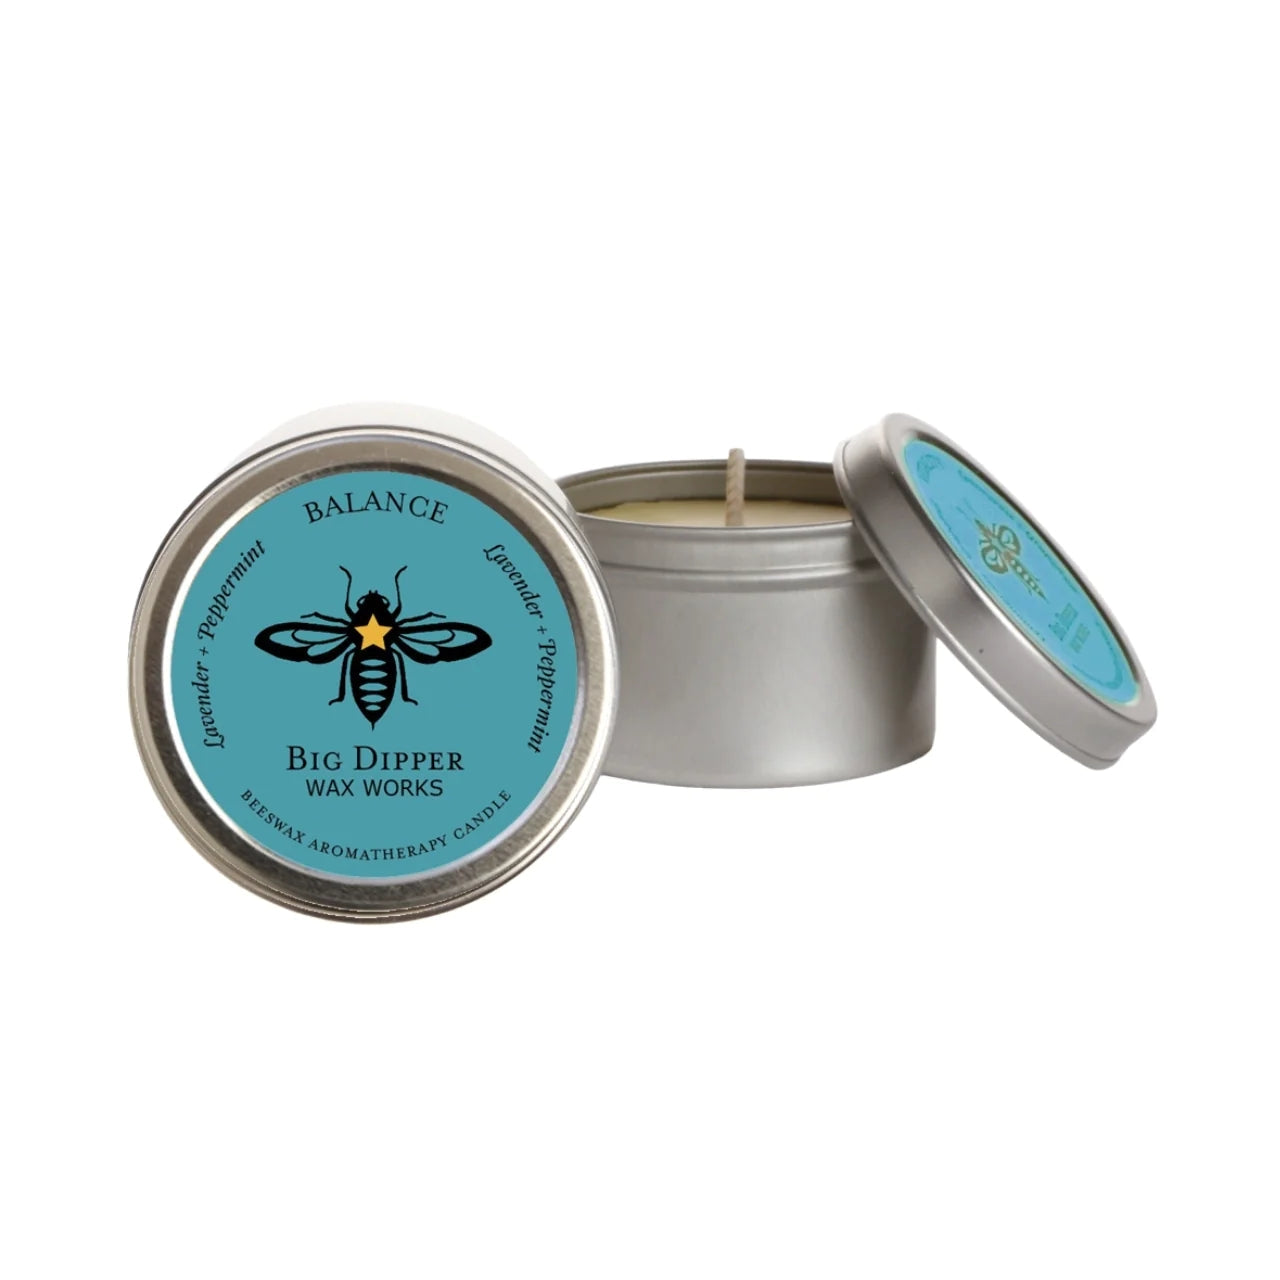 BDWW - Beeswax Aromatherapy Tin - Balance - Peppermint and Lavender